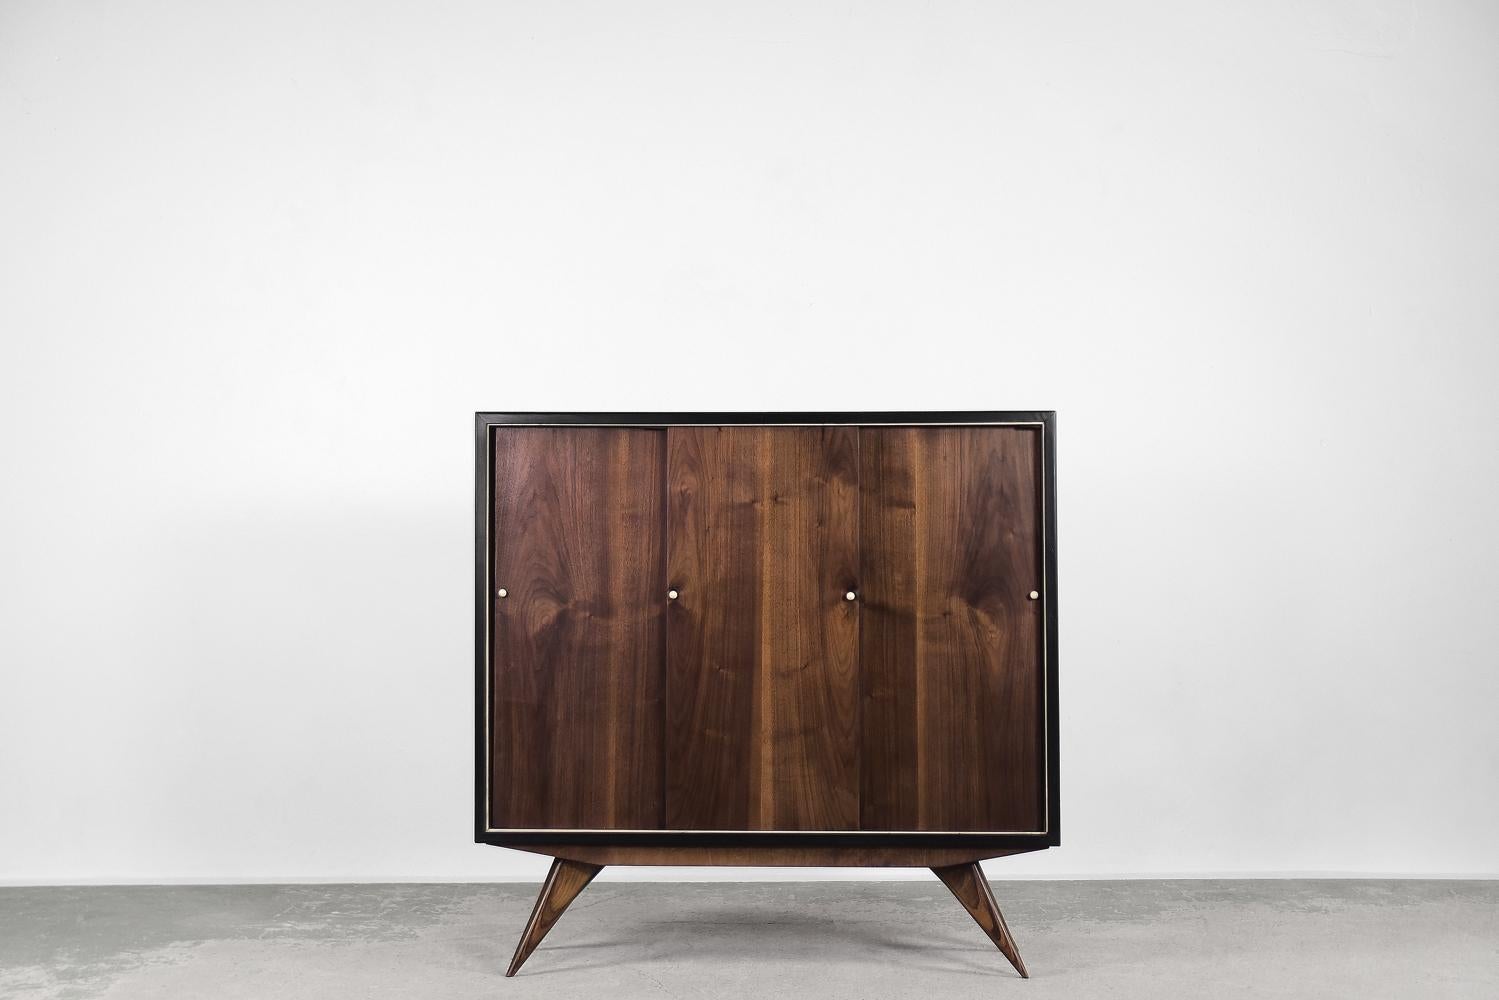 This classic cabinet was made in Scandinavia during the 1960s. This piece was finished with high-quality walnut wood with a dark, noble color and distinctive graining. It has three sliding doors. The black and white round handles give the object a